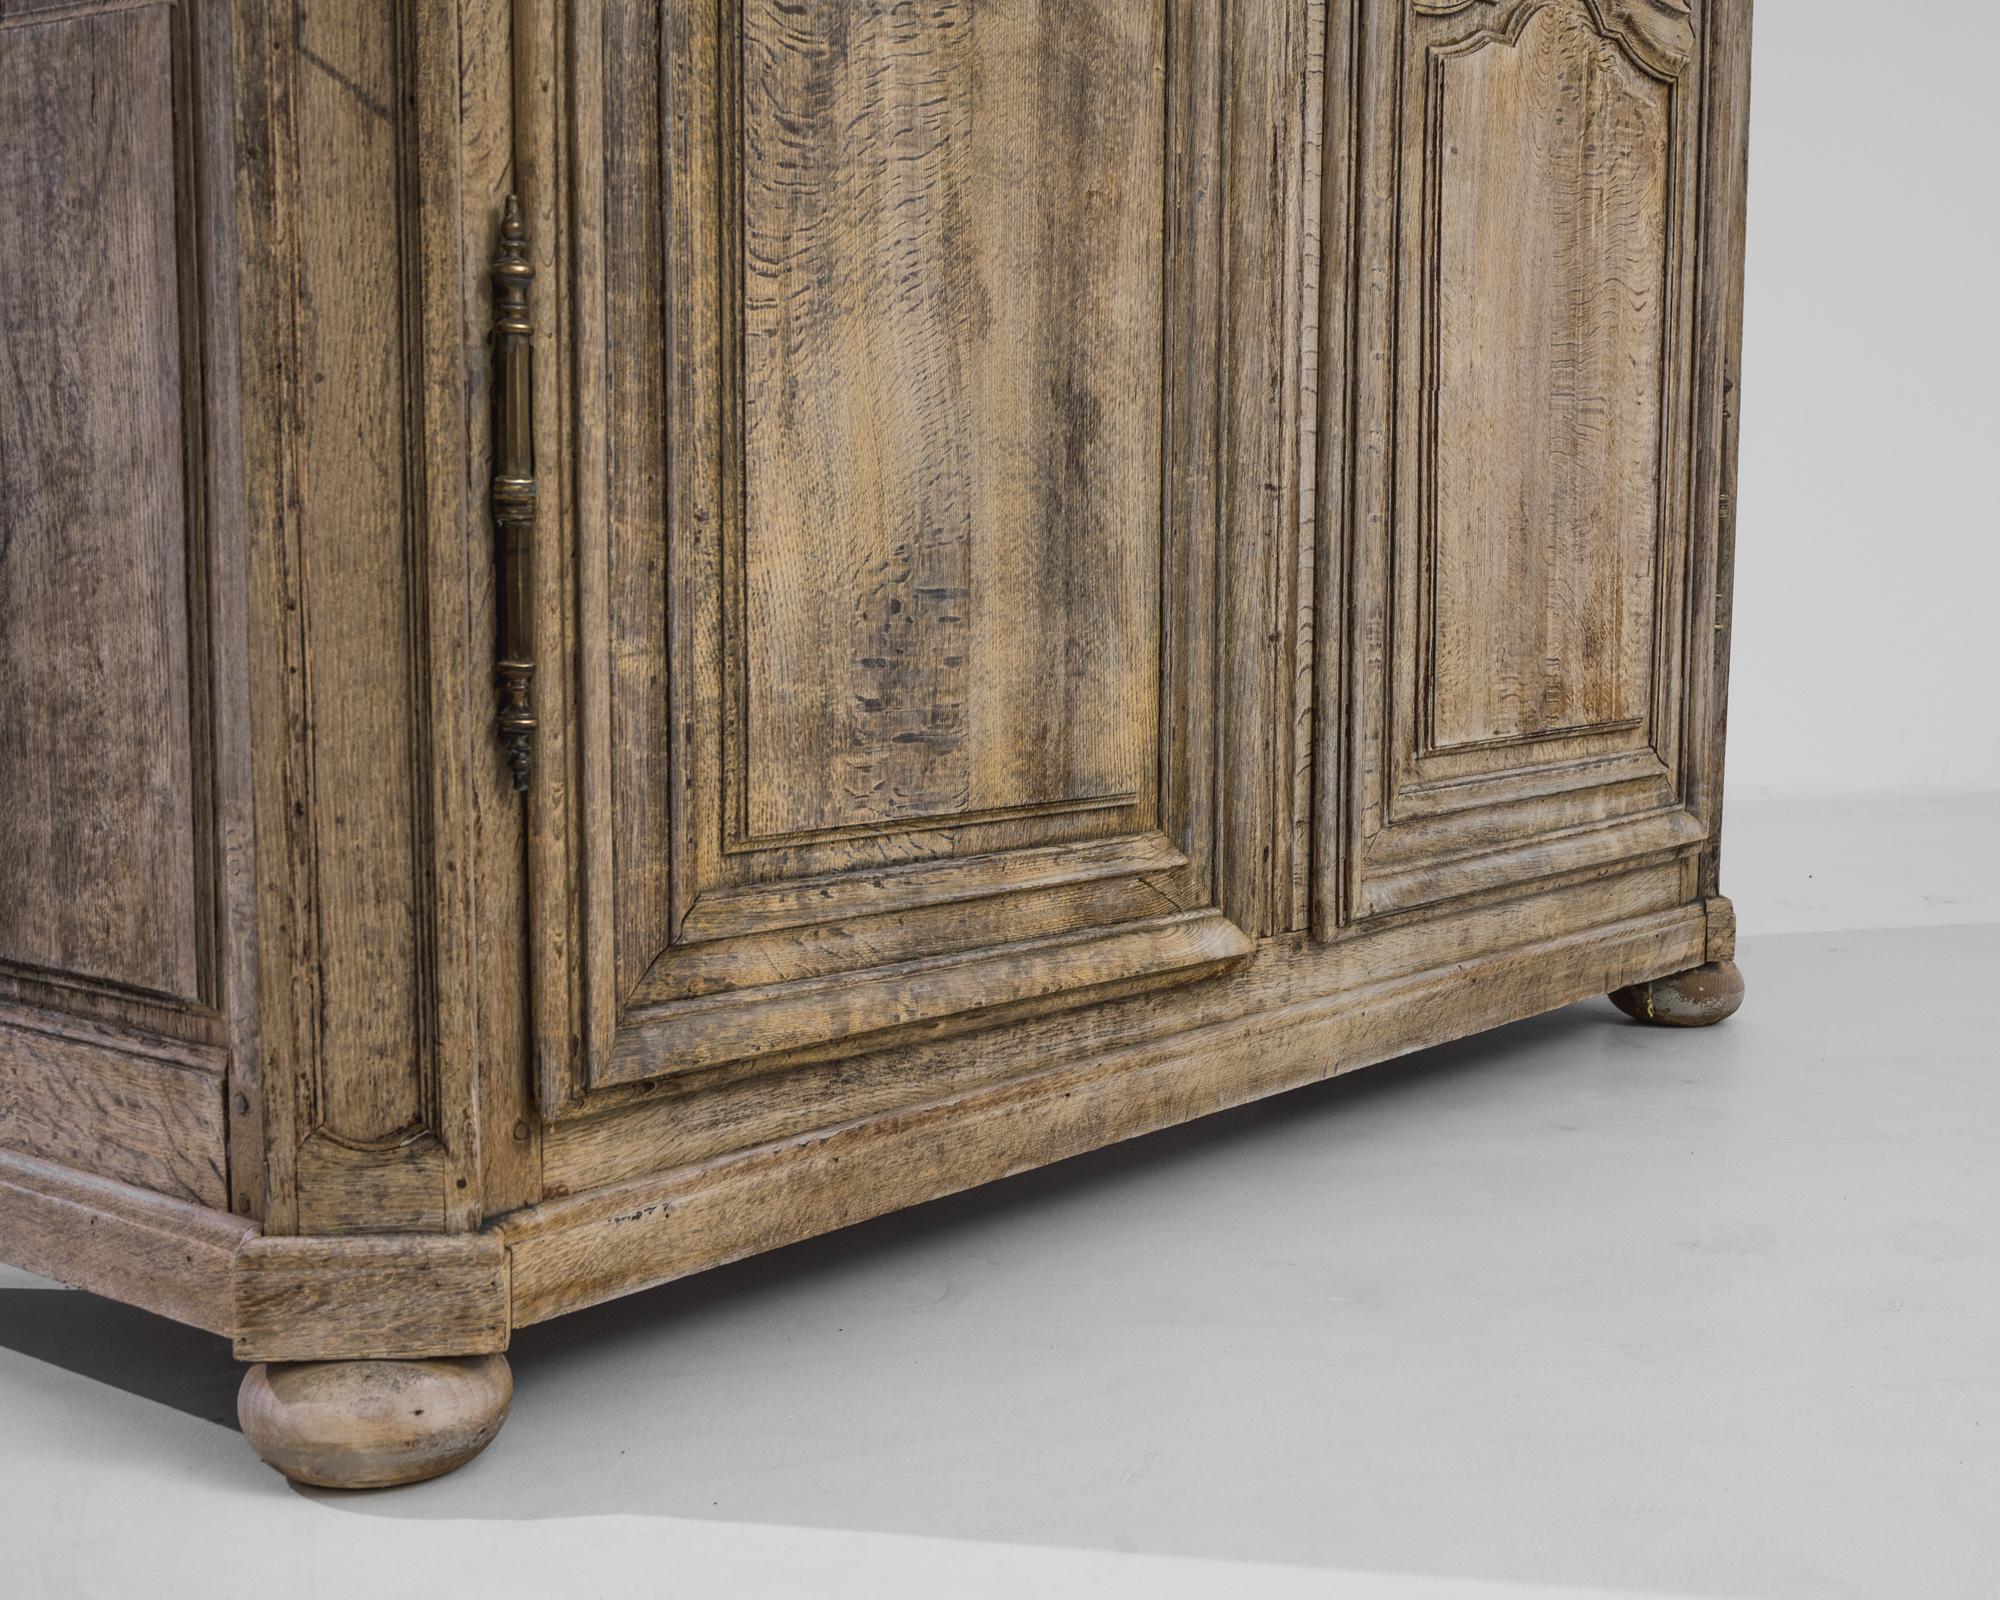 This elegant 19th century Belgian oak armoire was crafted in 1800 and is a timeless piece of that period. This remarkable piece encapsulates the unmatched artistry of Belgian craftsmen, emanating the charm of a bygone era. Intricate detailing adorns